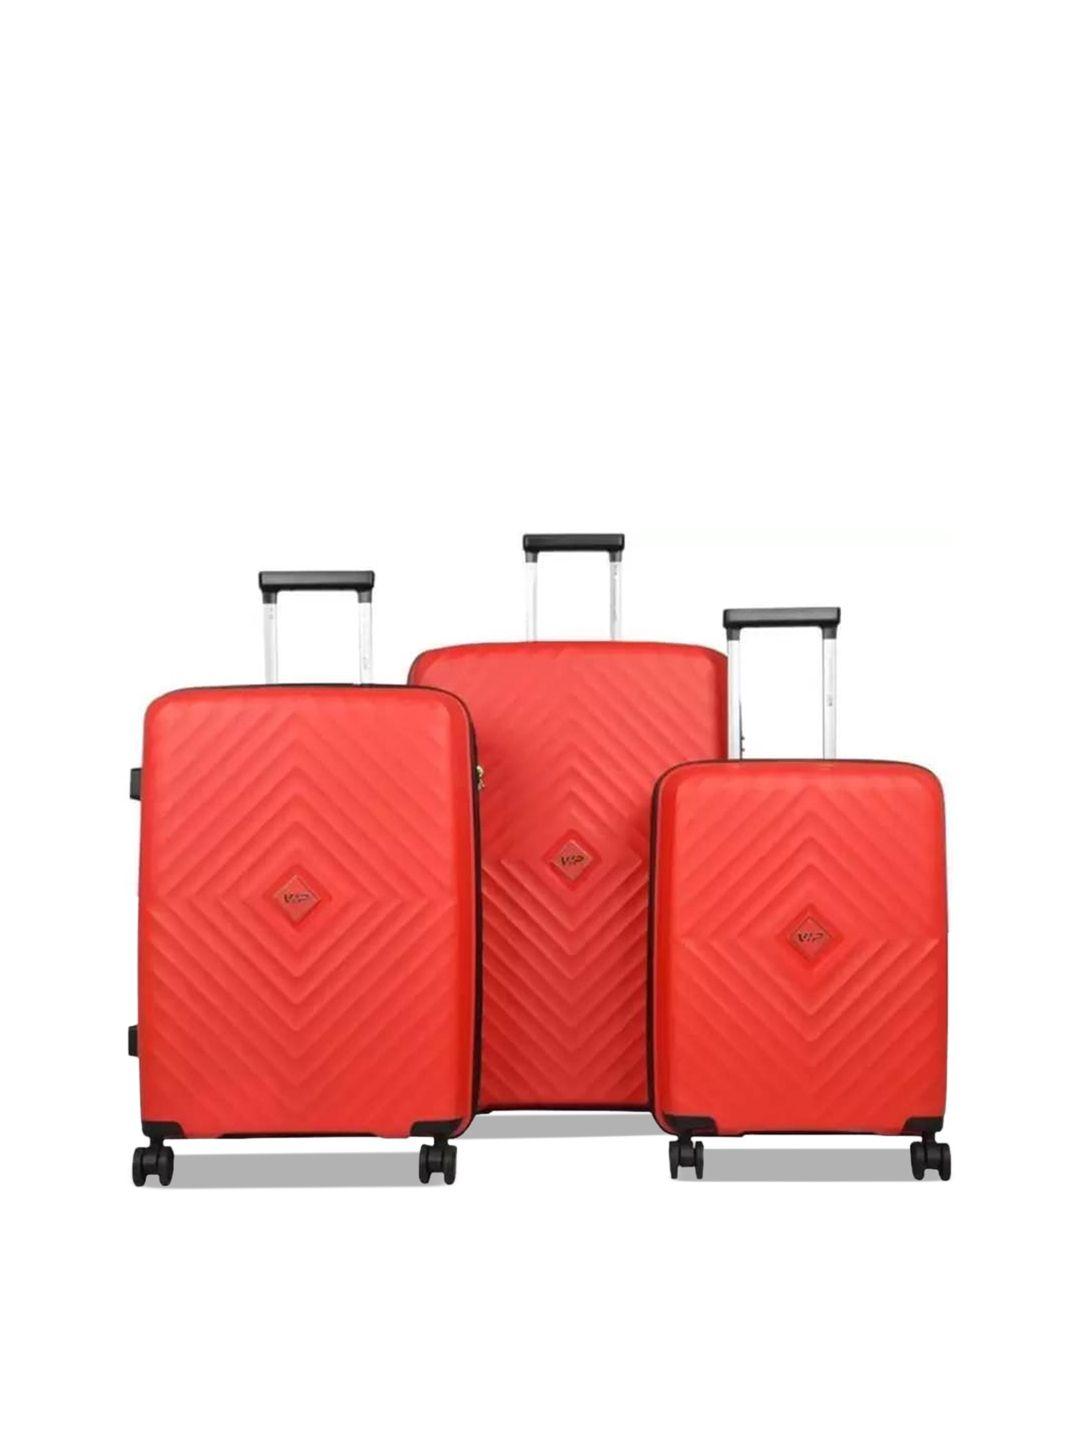 vip set of 3 hard-sided suitcases trolley bag